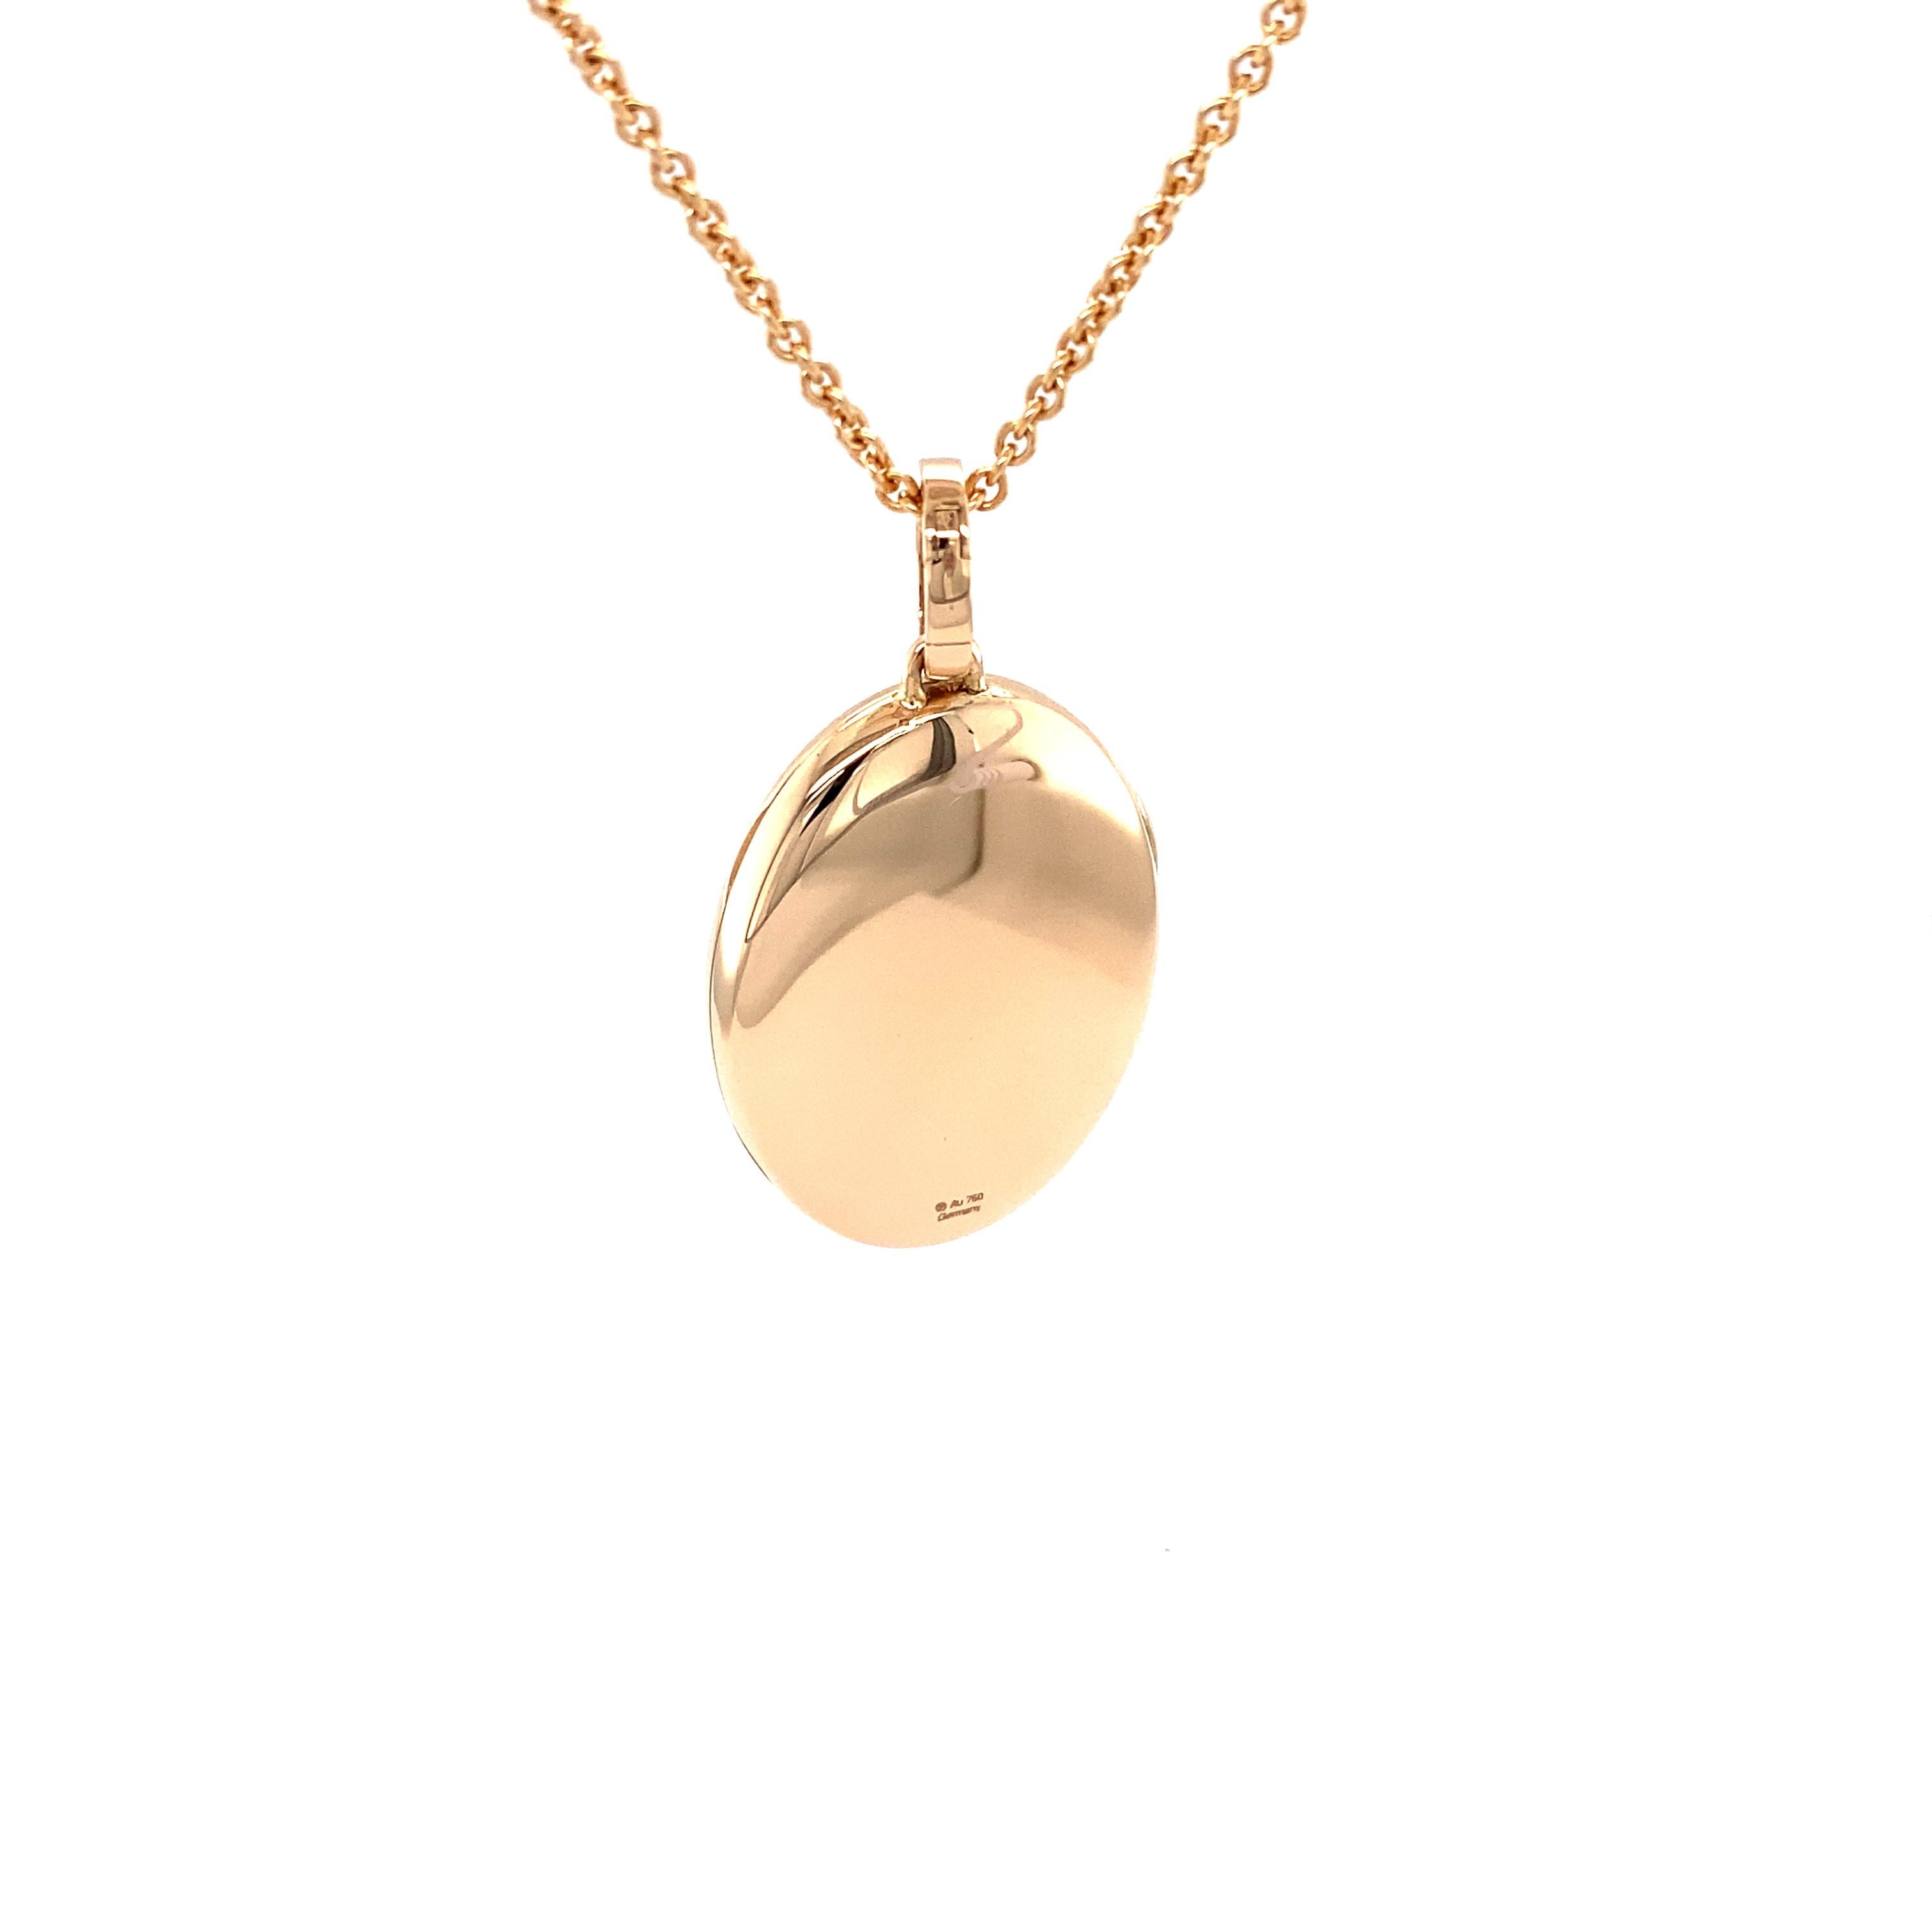 Women's Customizable Oval Polished Locket Pendant Necklace  - 18k Rose Gold 23.0*32.0 mm For Sale